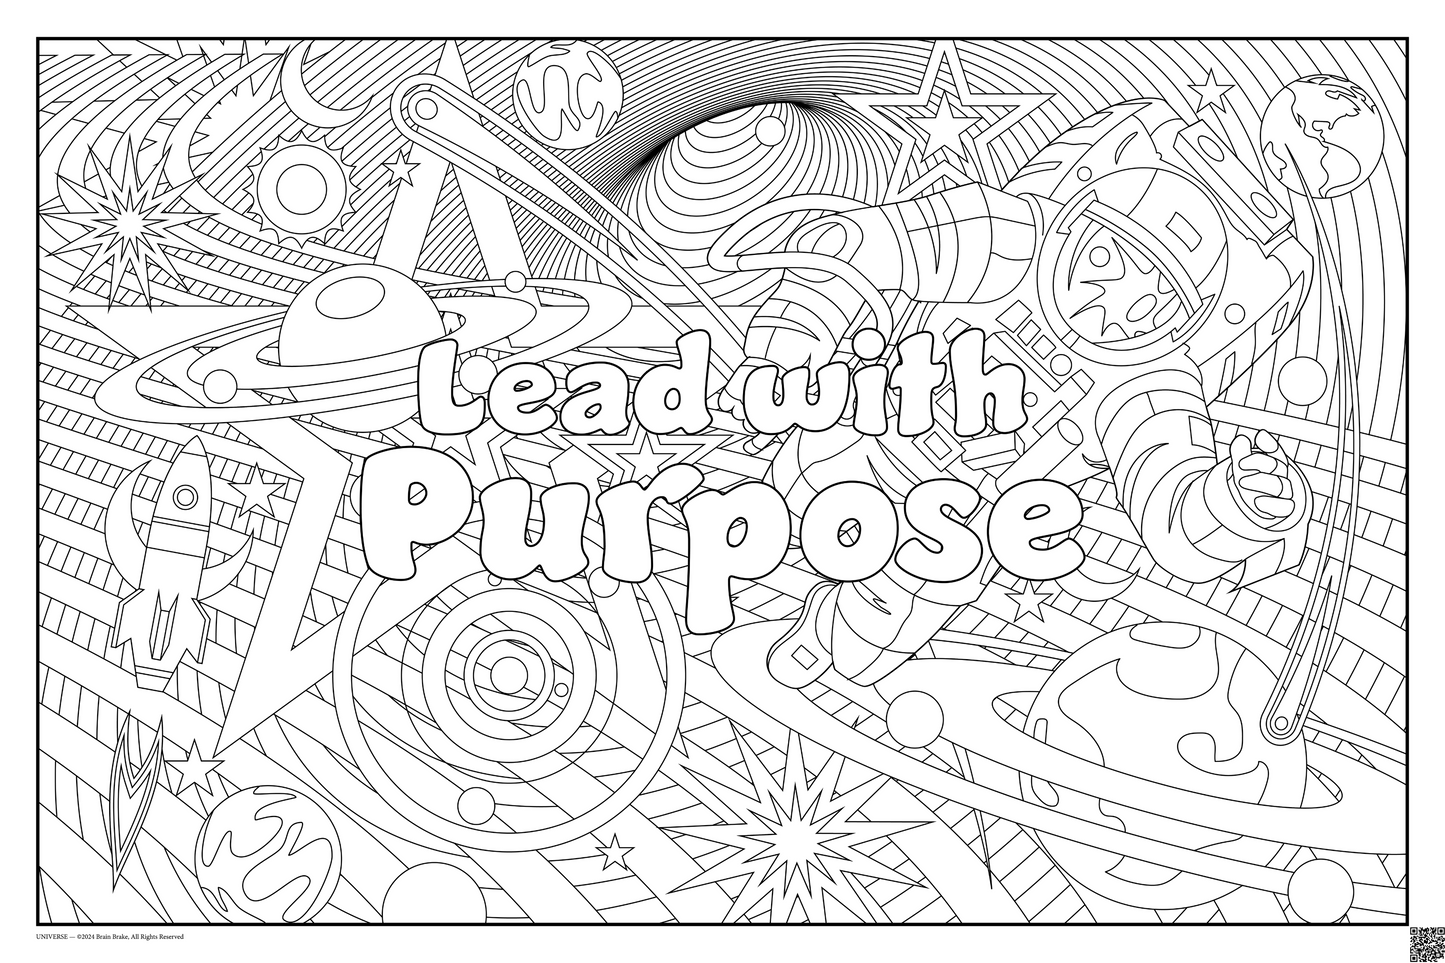 Build Community: Lead with Purpose